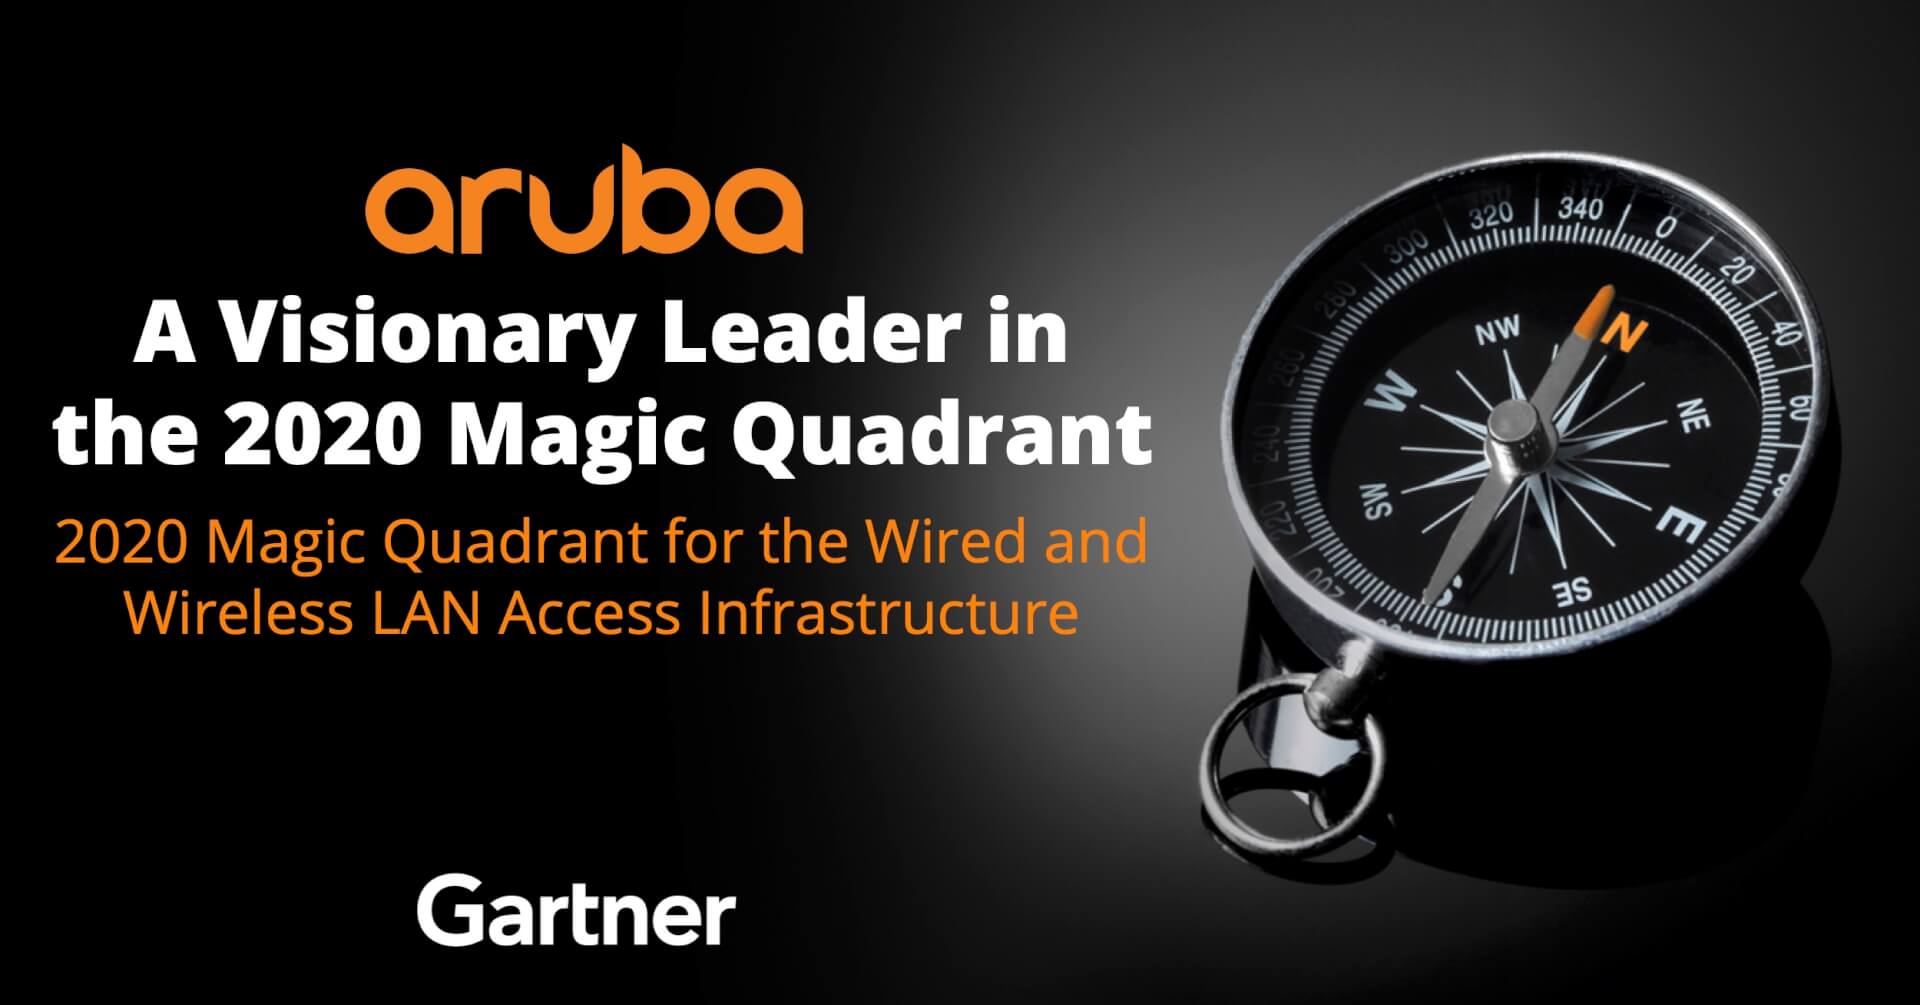 Aruba and the Gartner Wired and Wireless LAN Access Infrastructure